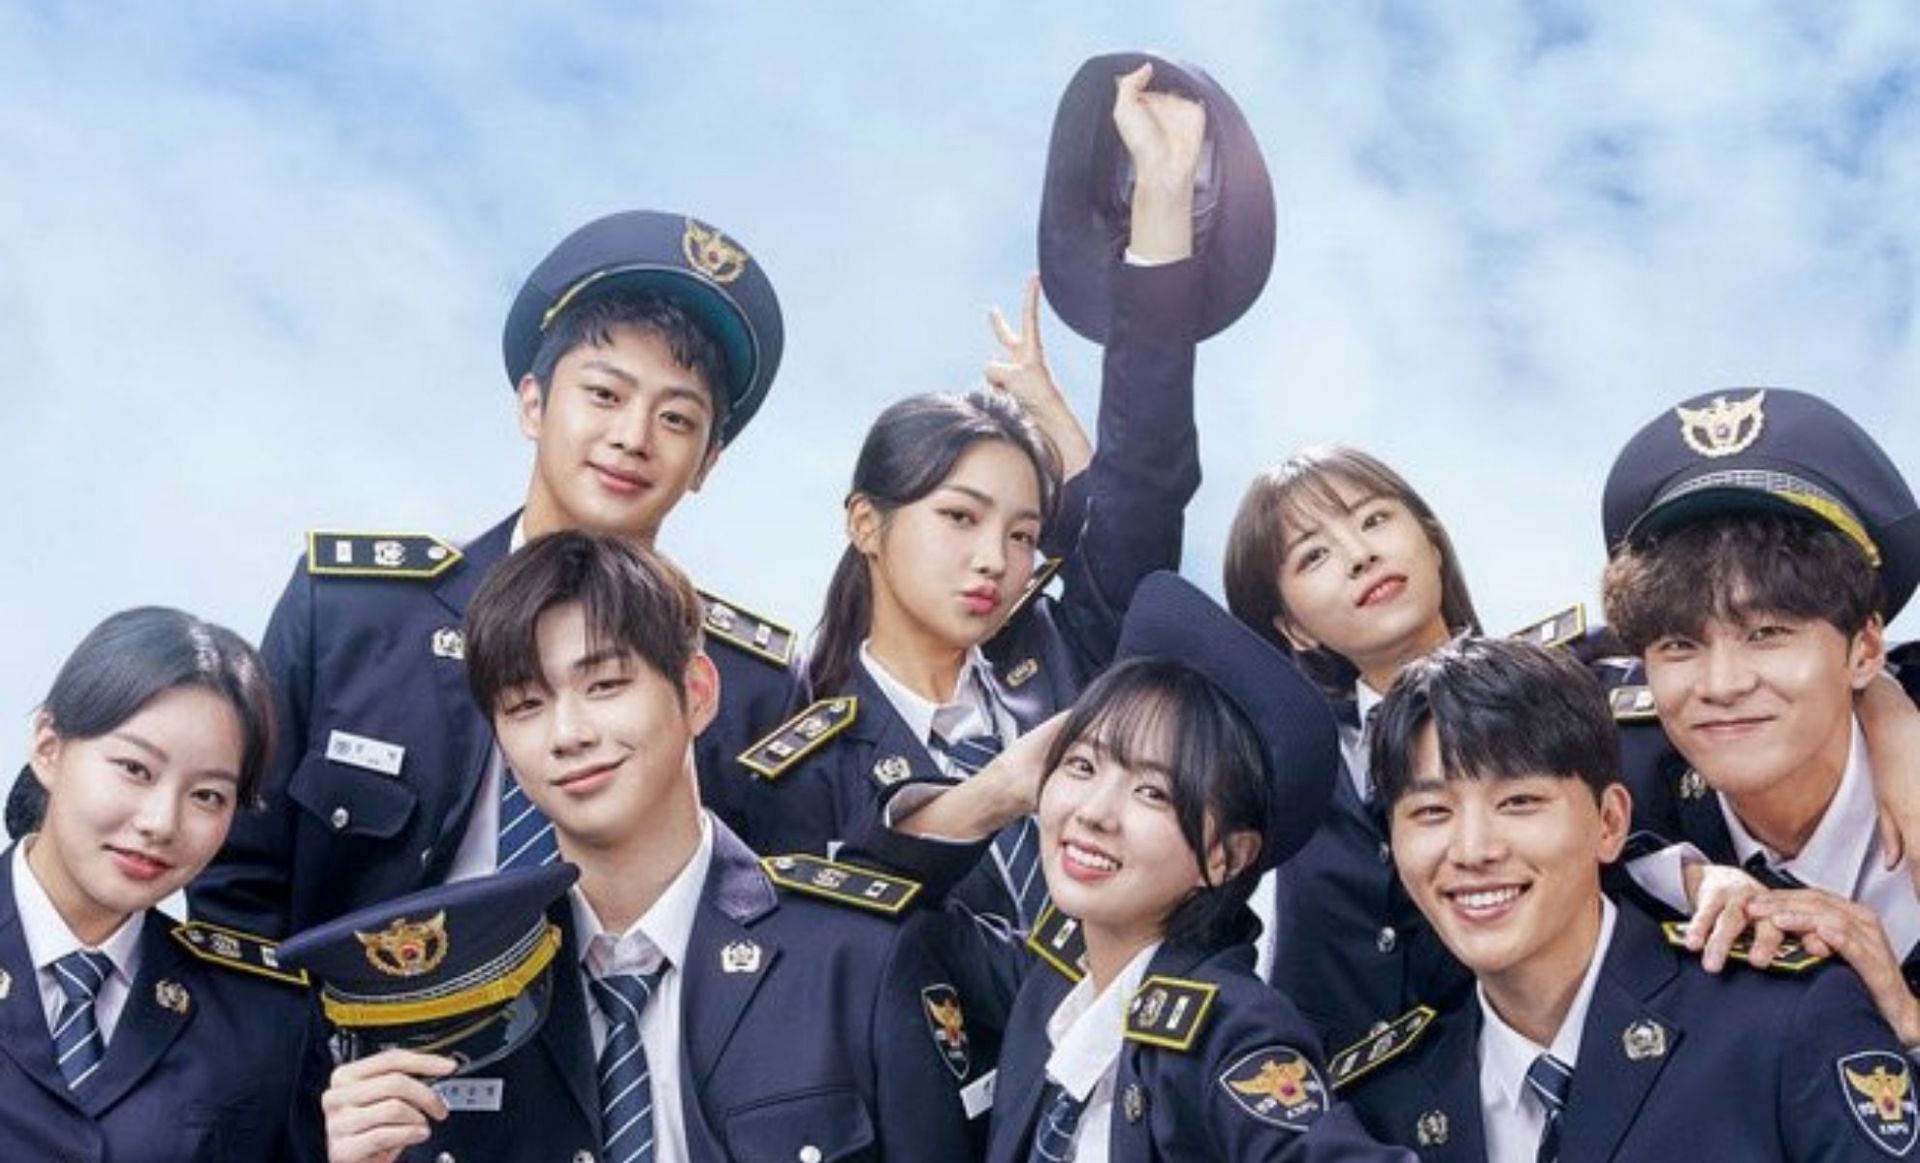 Rookie Cops poster (Image via @theseoulstory/Twitter)